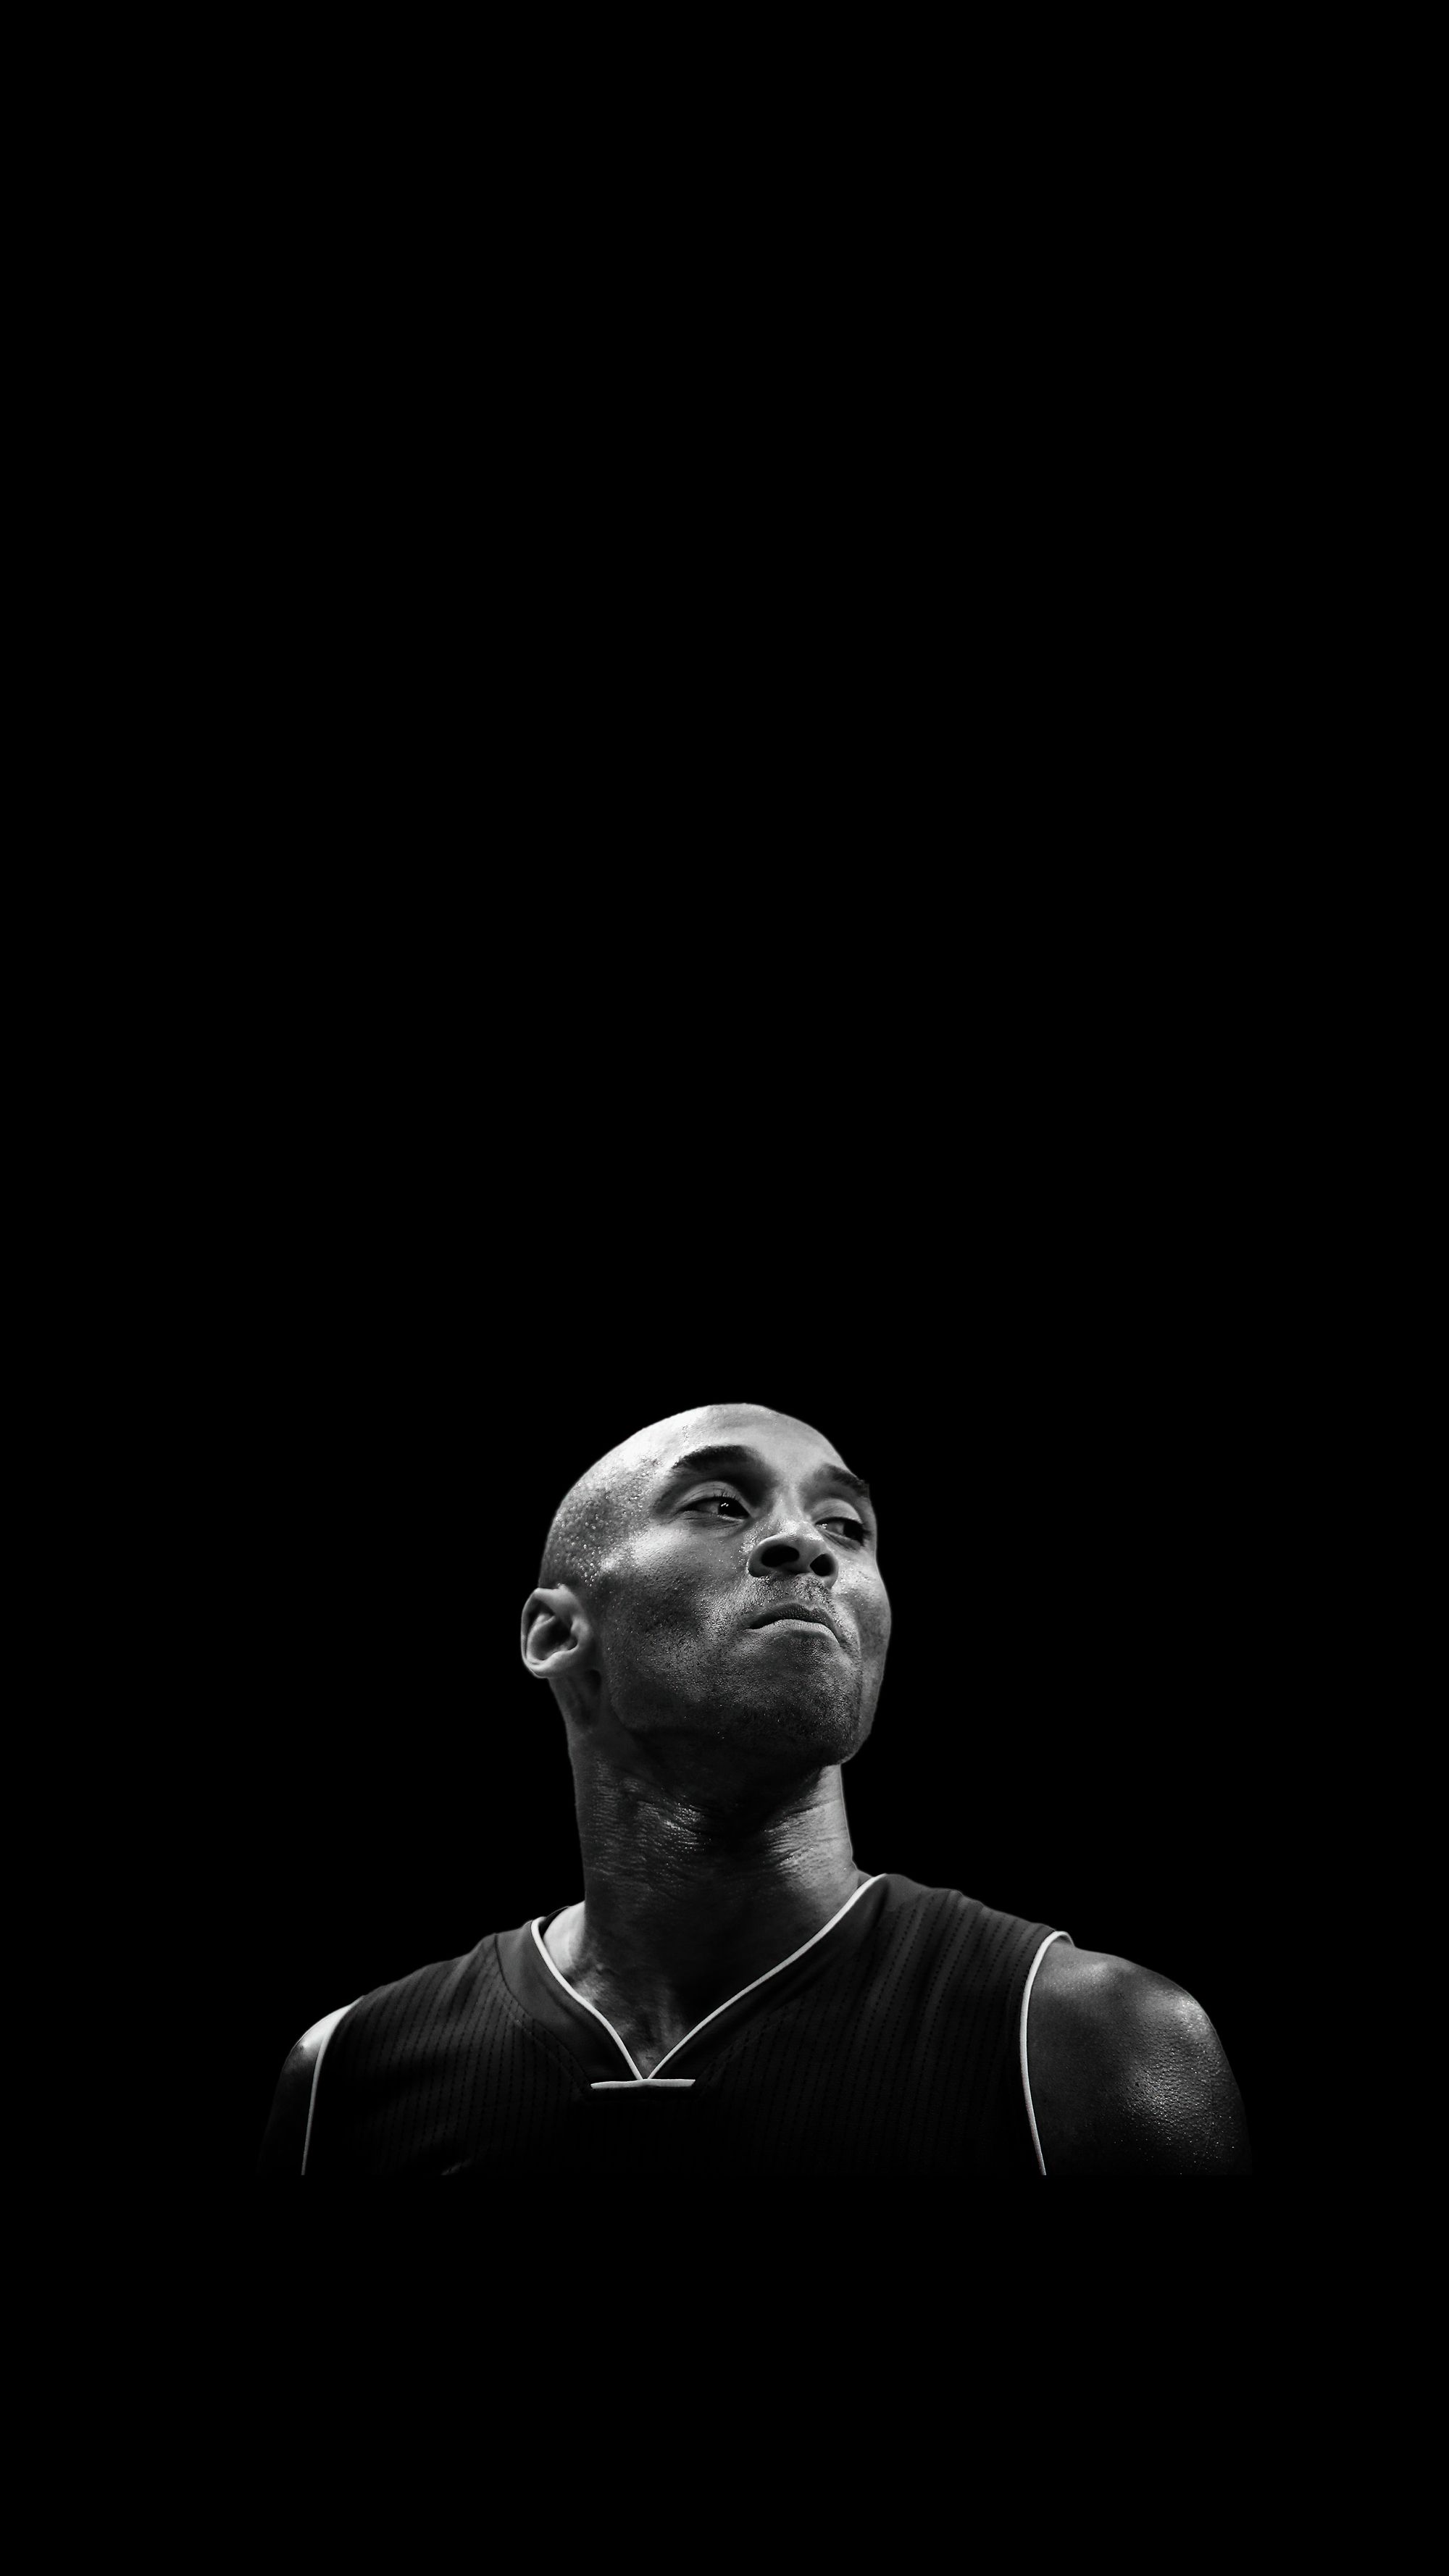 Other Laker Kobe Fans Might Enjoy This Wallpaper As Well. Rip Mamba